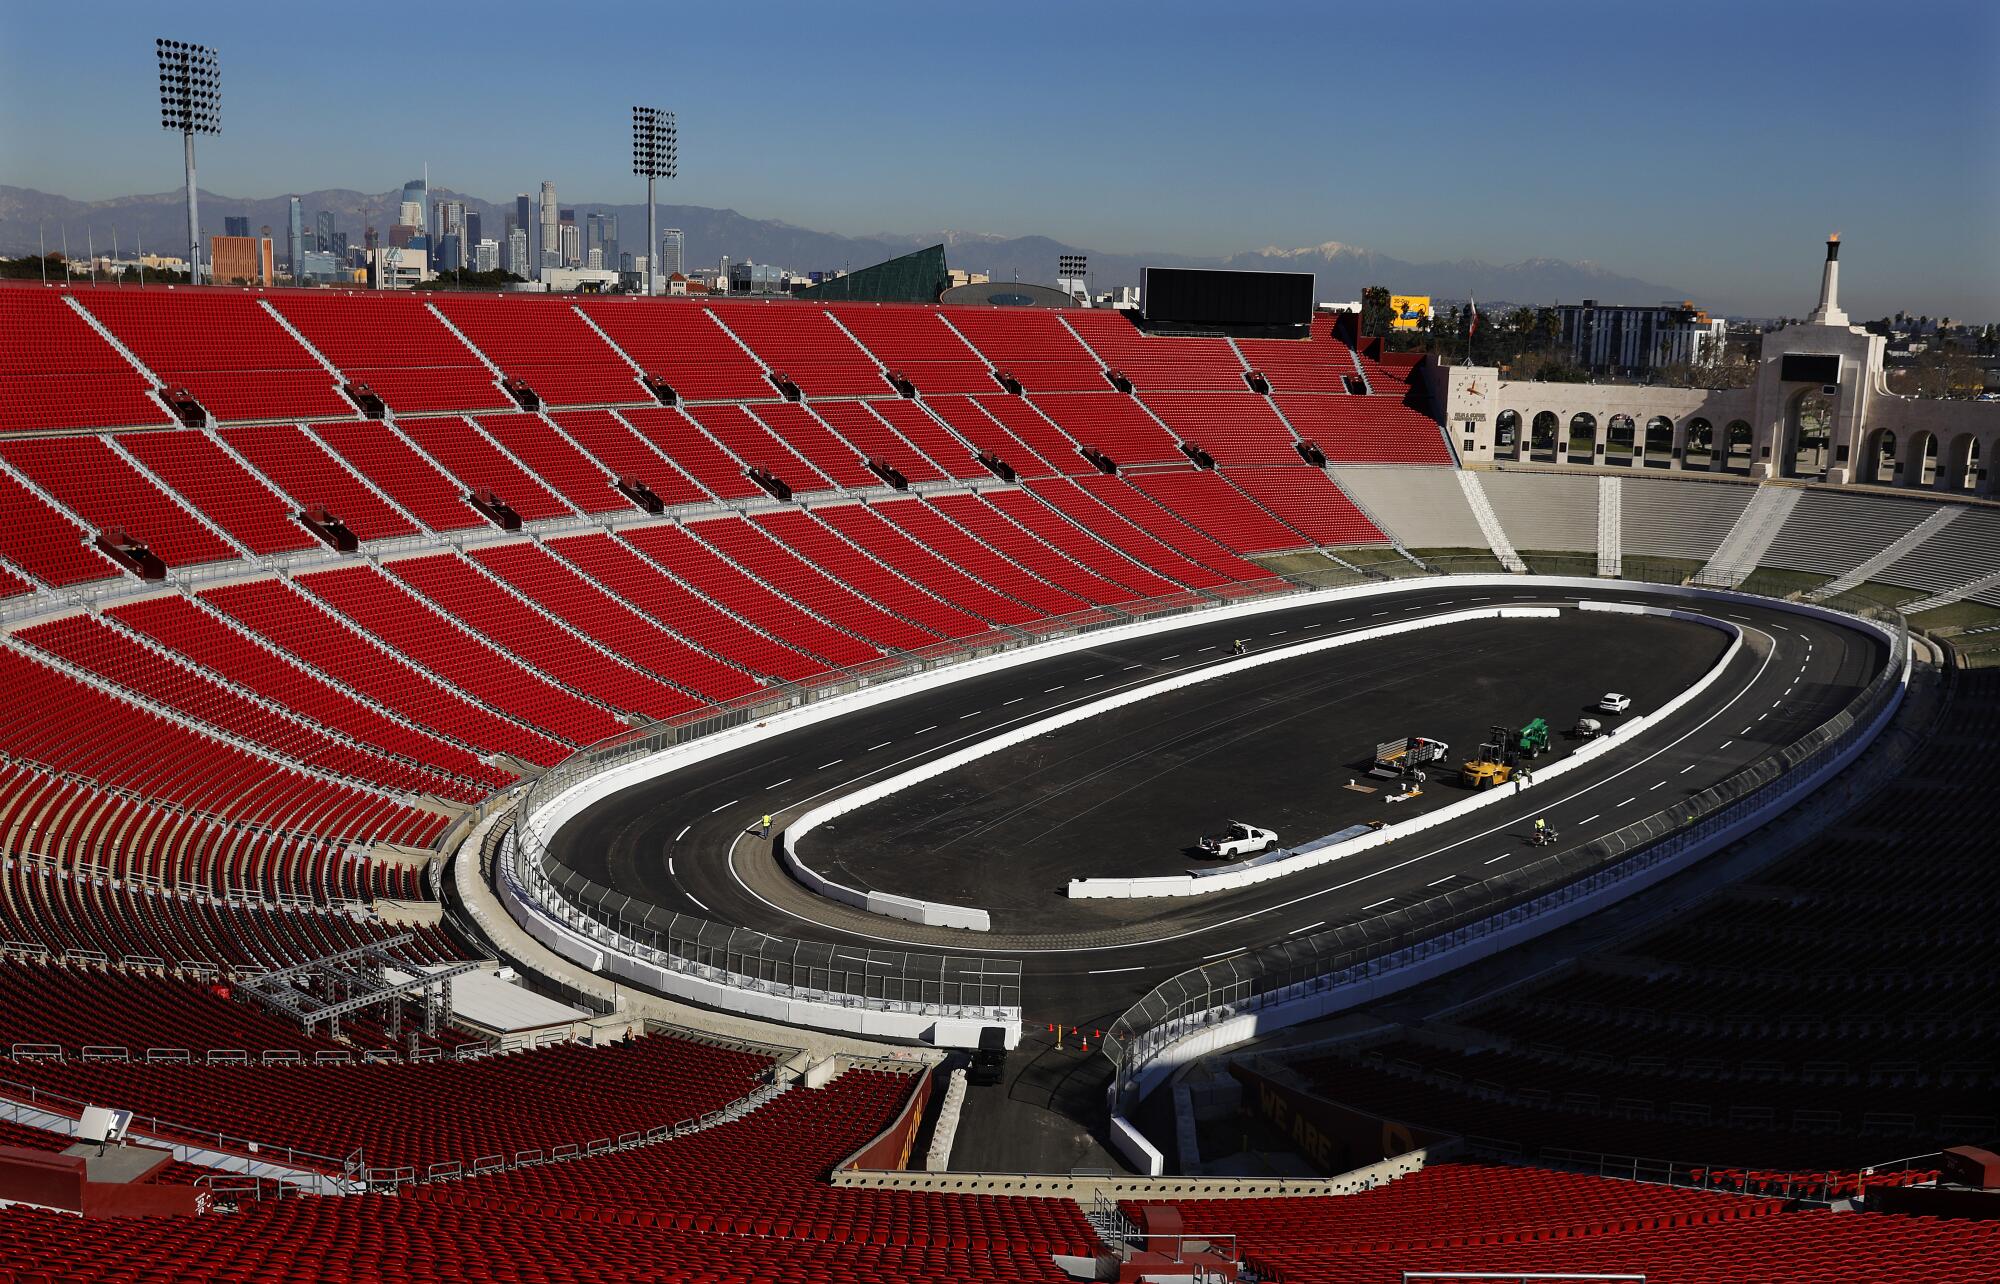 Lane lines are painted ahead of the NASCAR race at the Coliseum